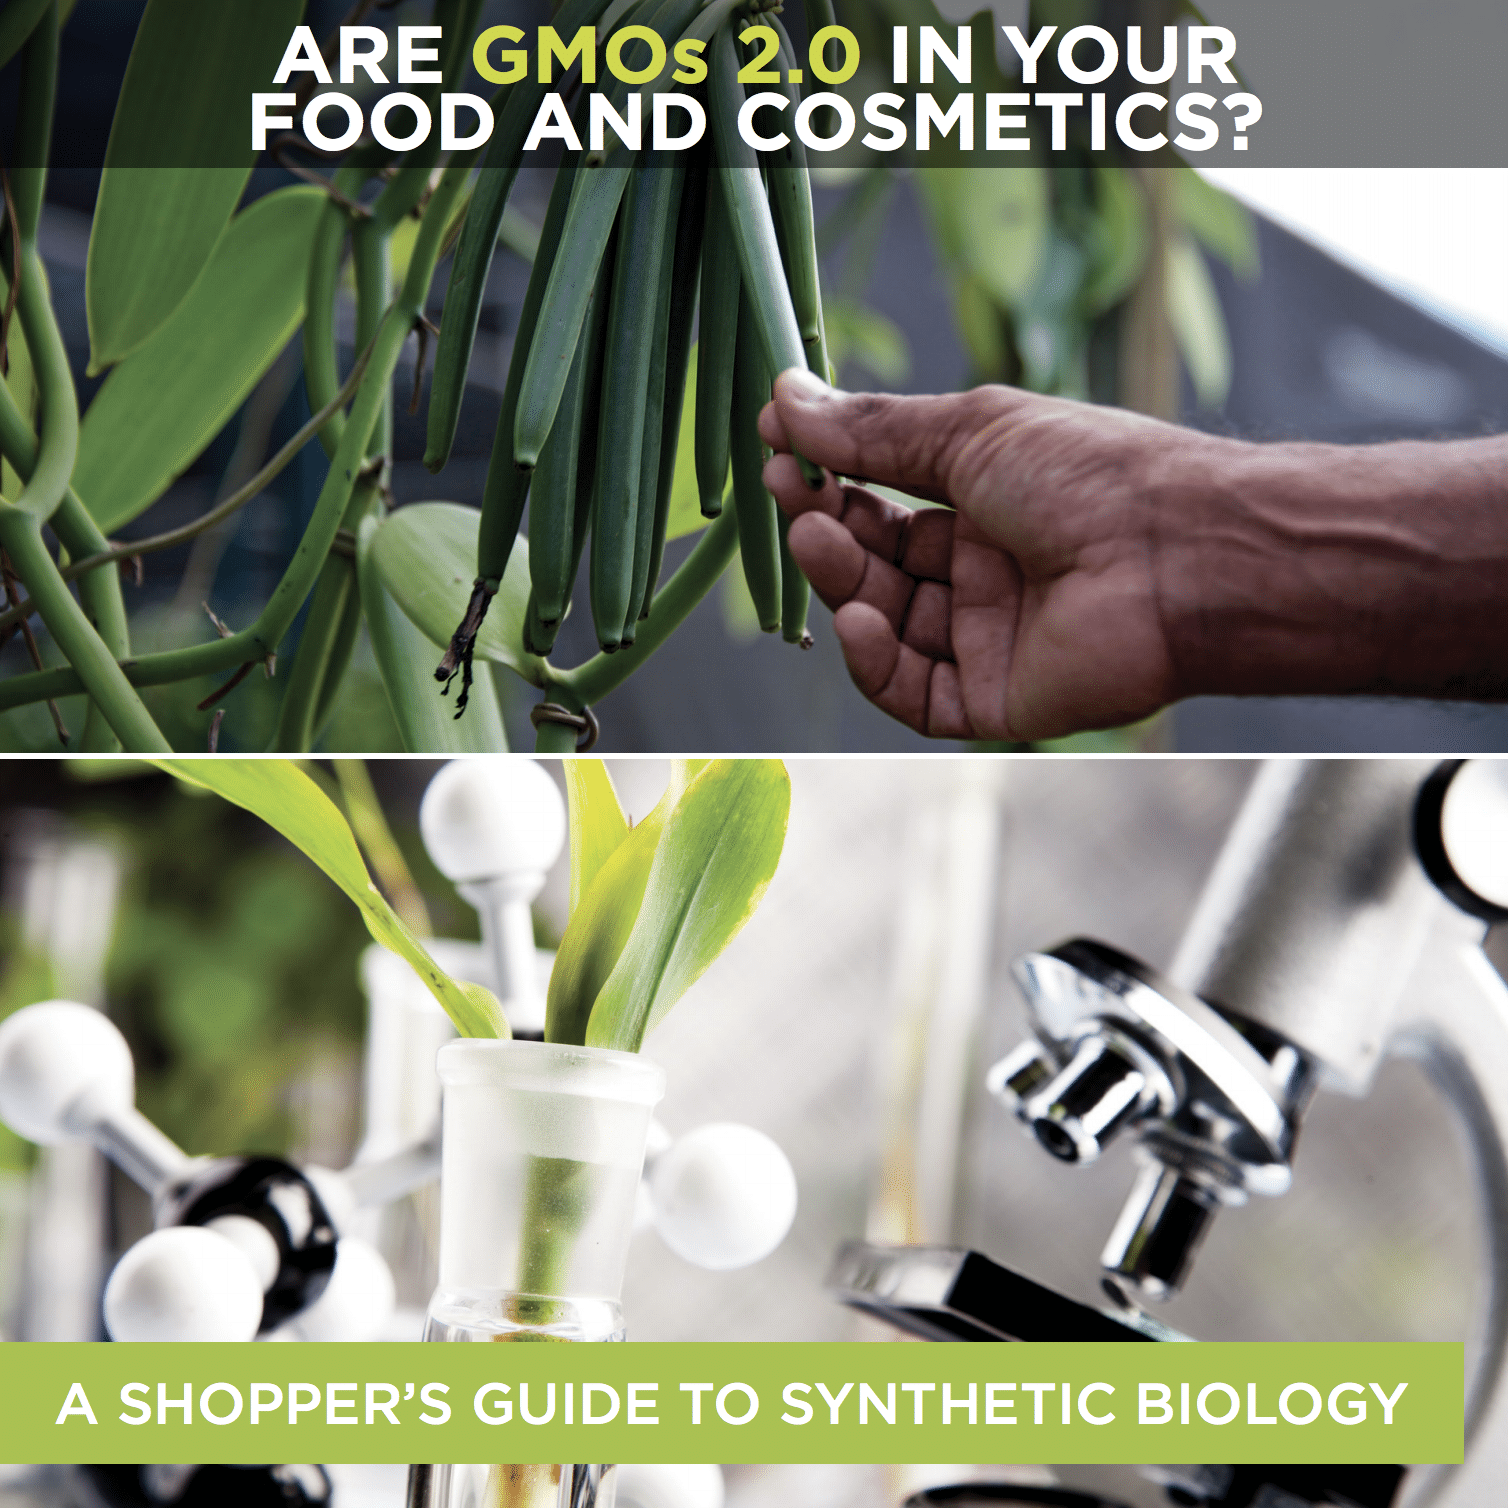 A Shopper’s Guide to Synthetic Biology